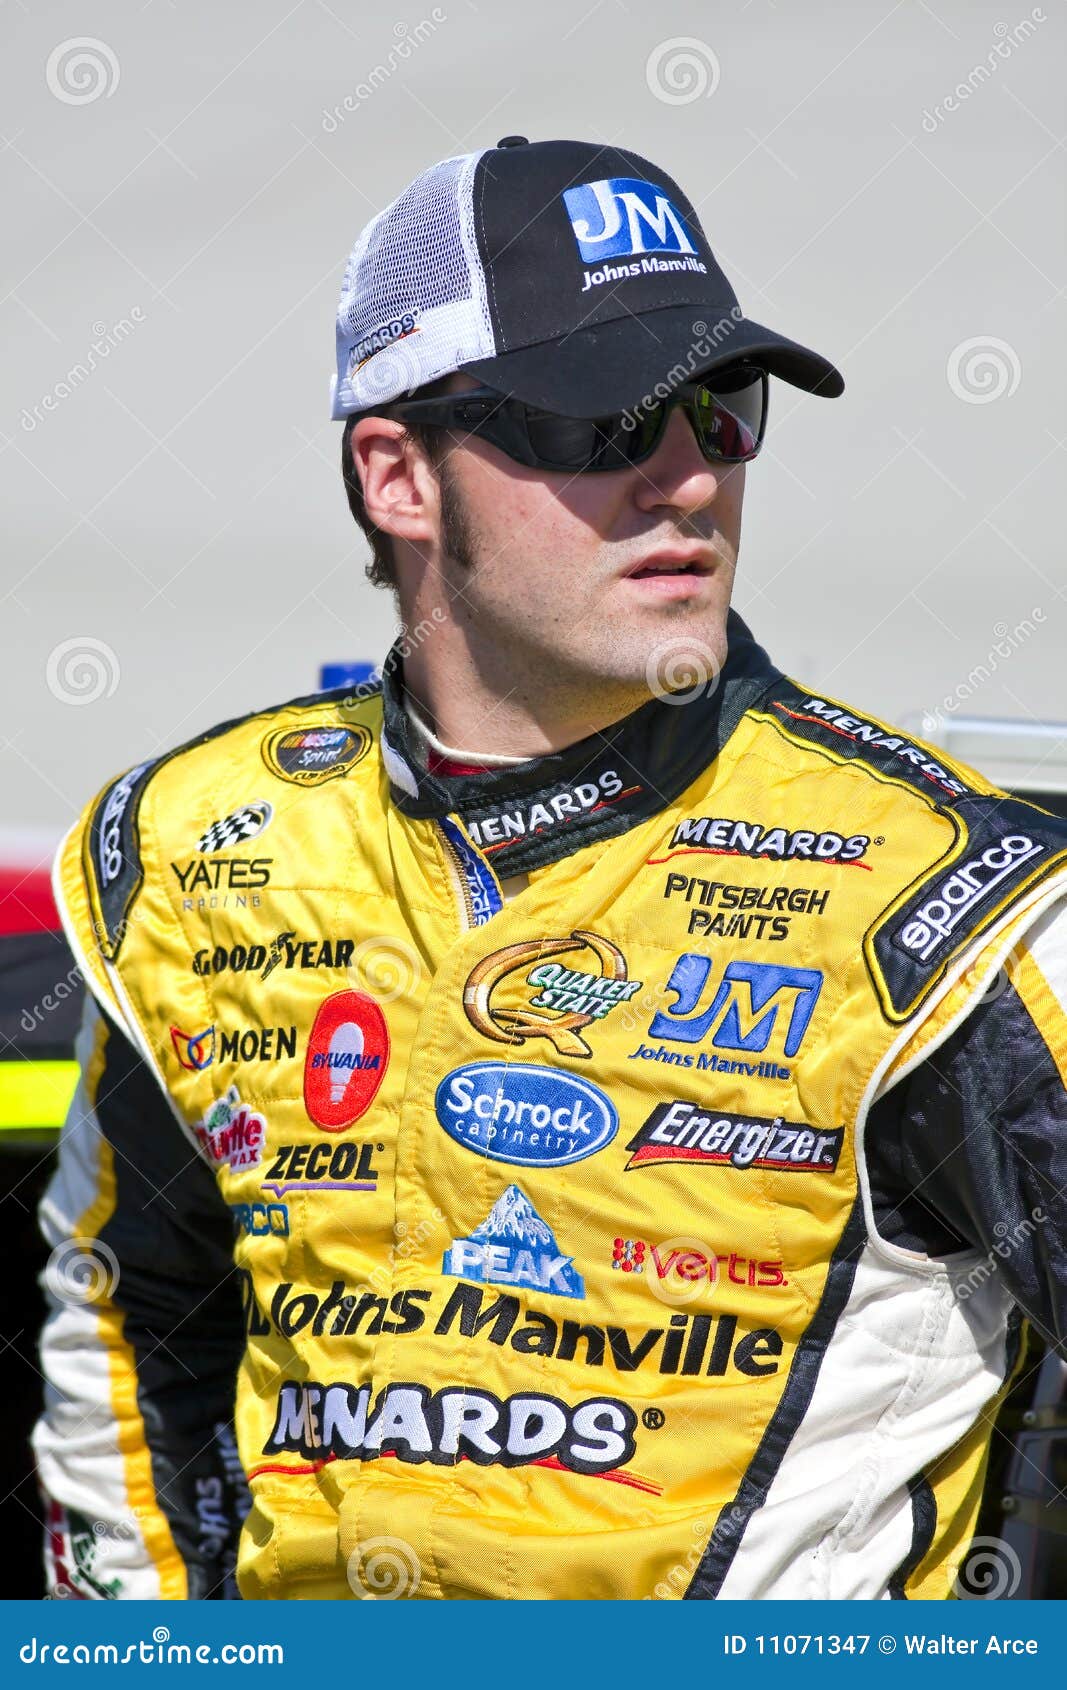 NASCAR: September 25 AAA 400. 25 September, 2009: Paul Menard watches qualifying for the AAA 400 race at the Dover International Speedway in Dover, DE